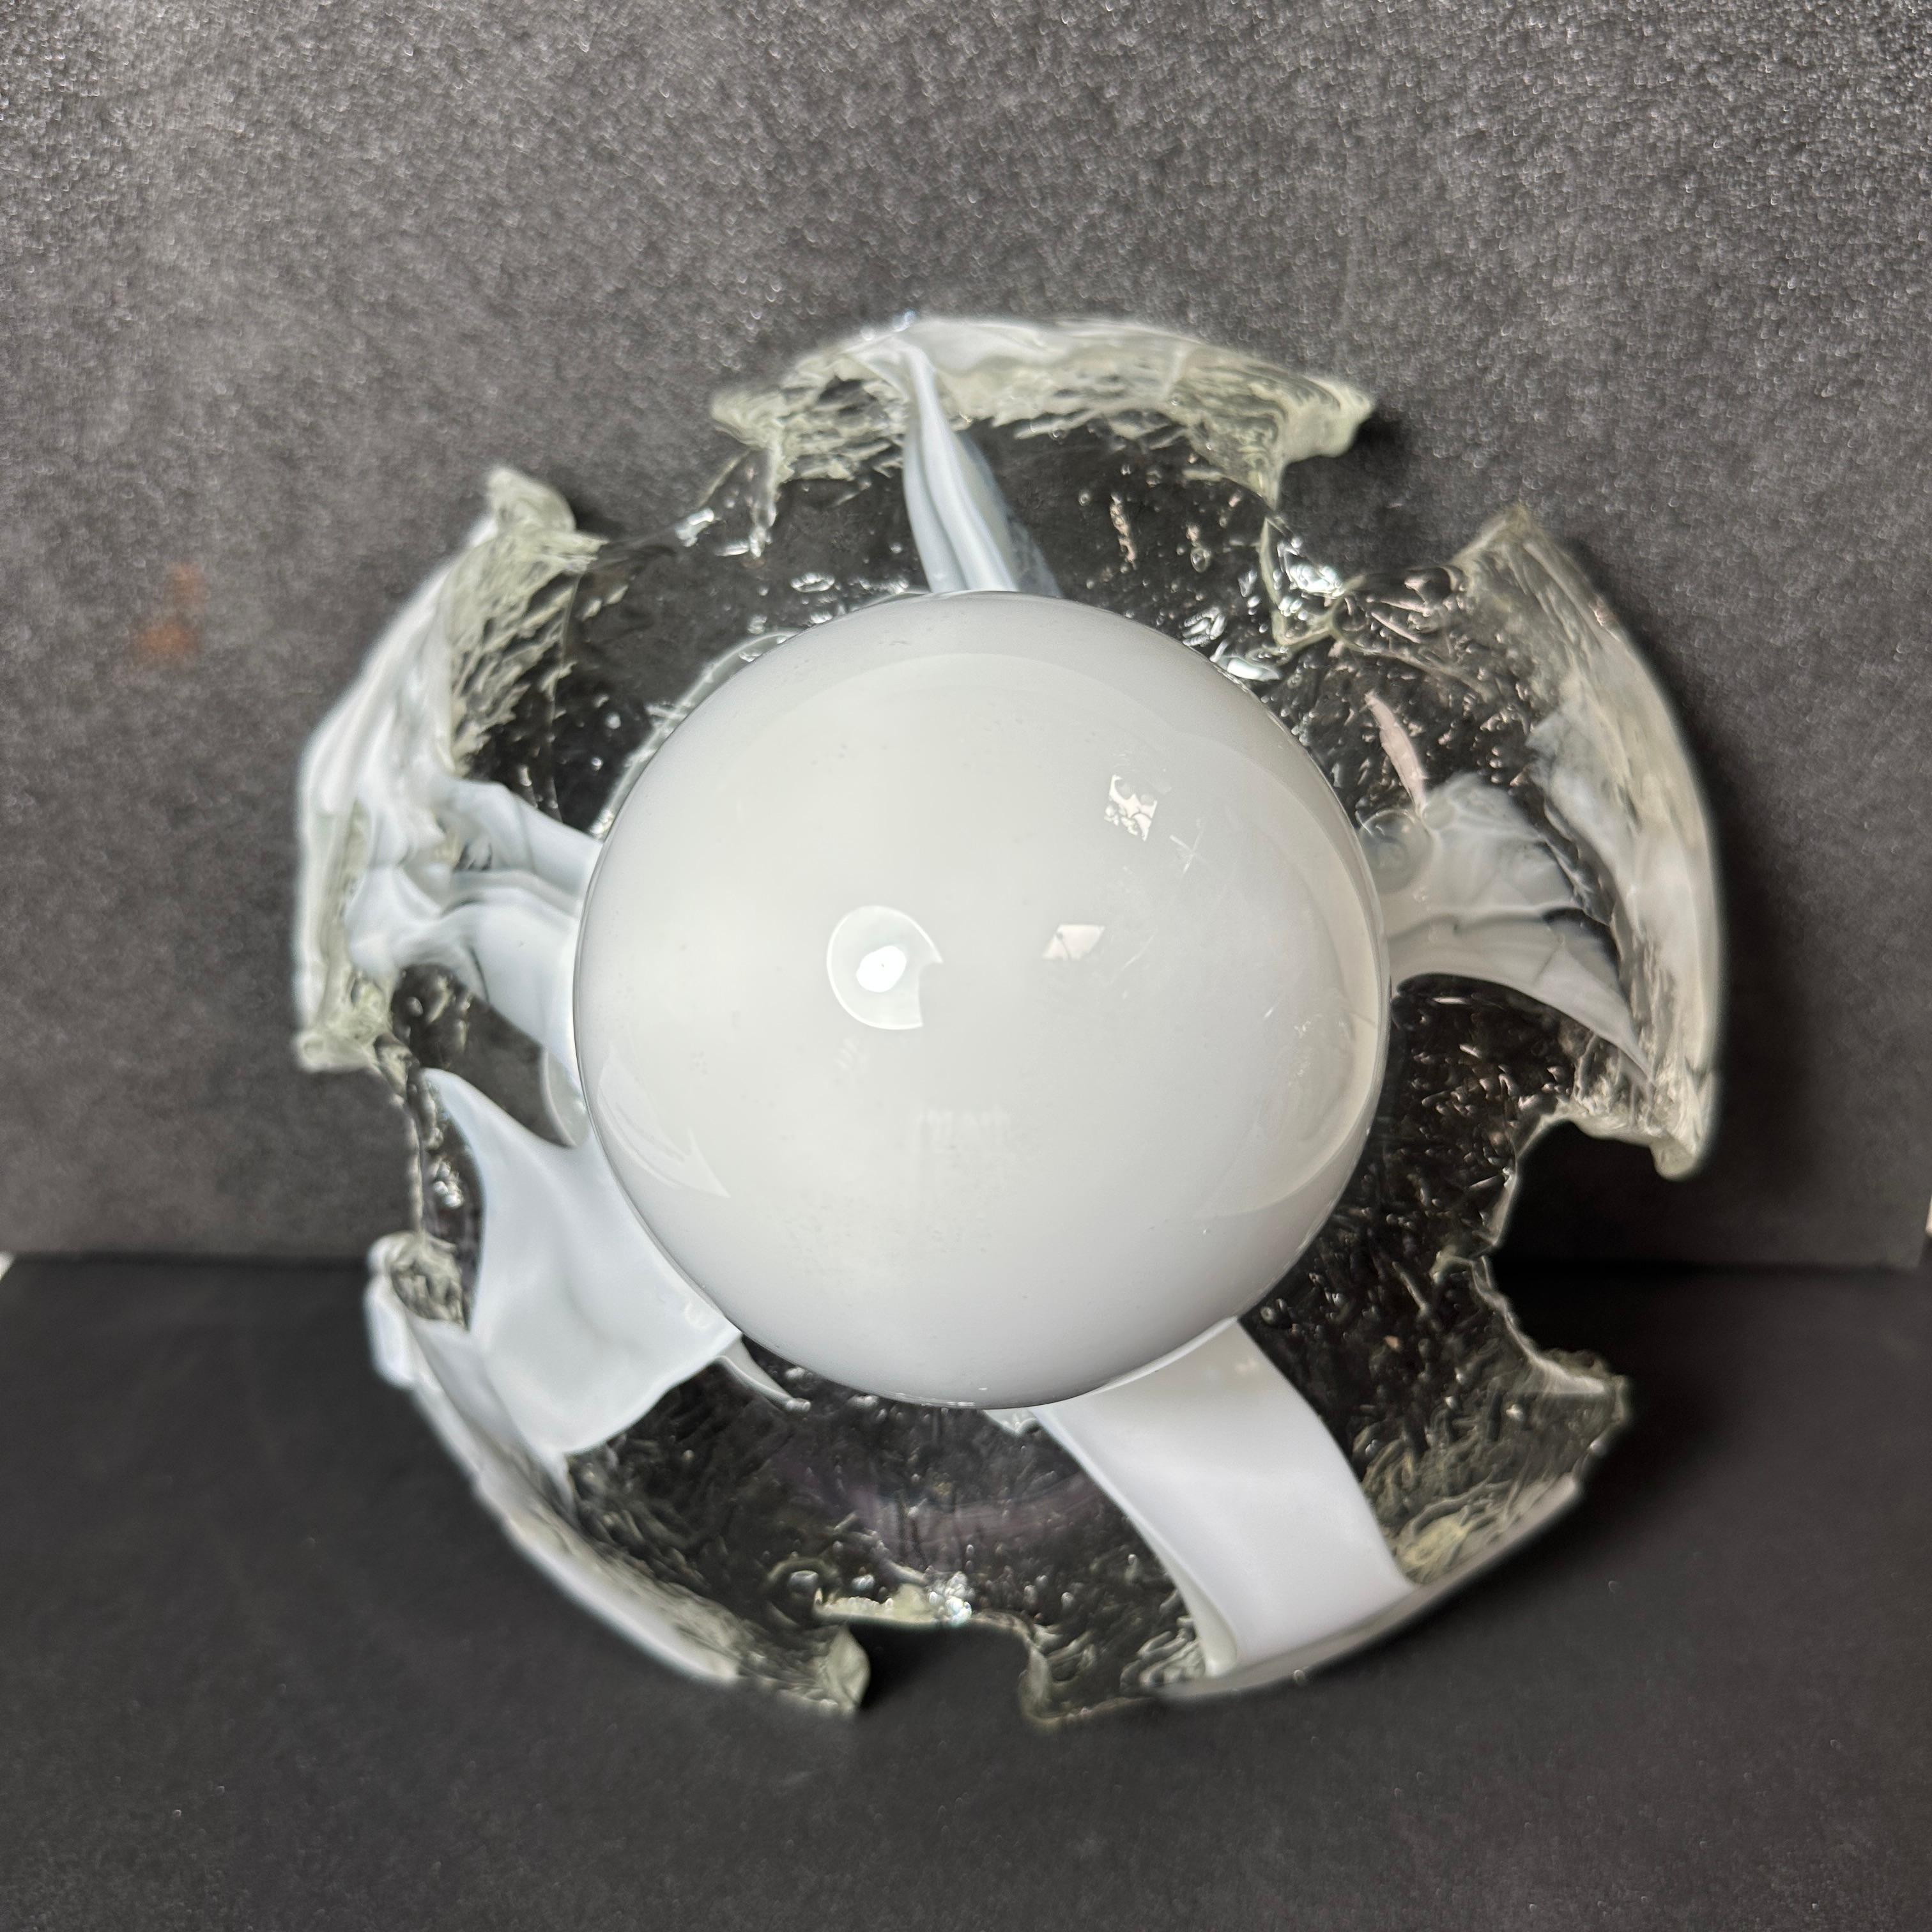 Vintage Murano Glass Flush Mount or Sconce Wall Light Italy, 1970s For Sale 2